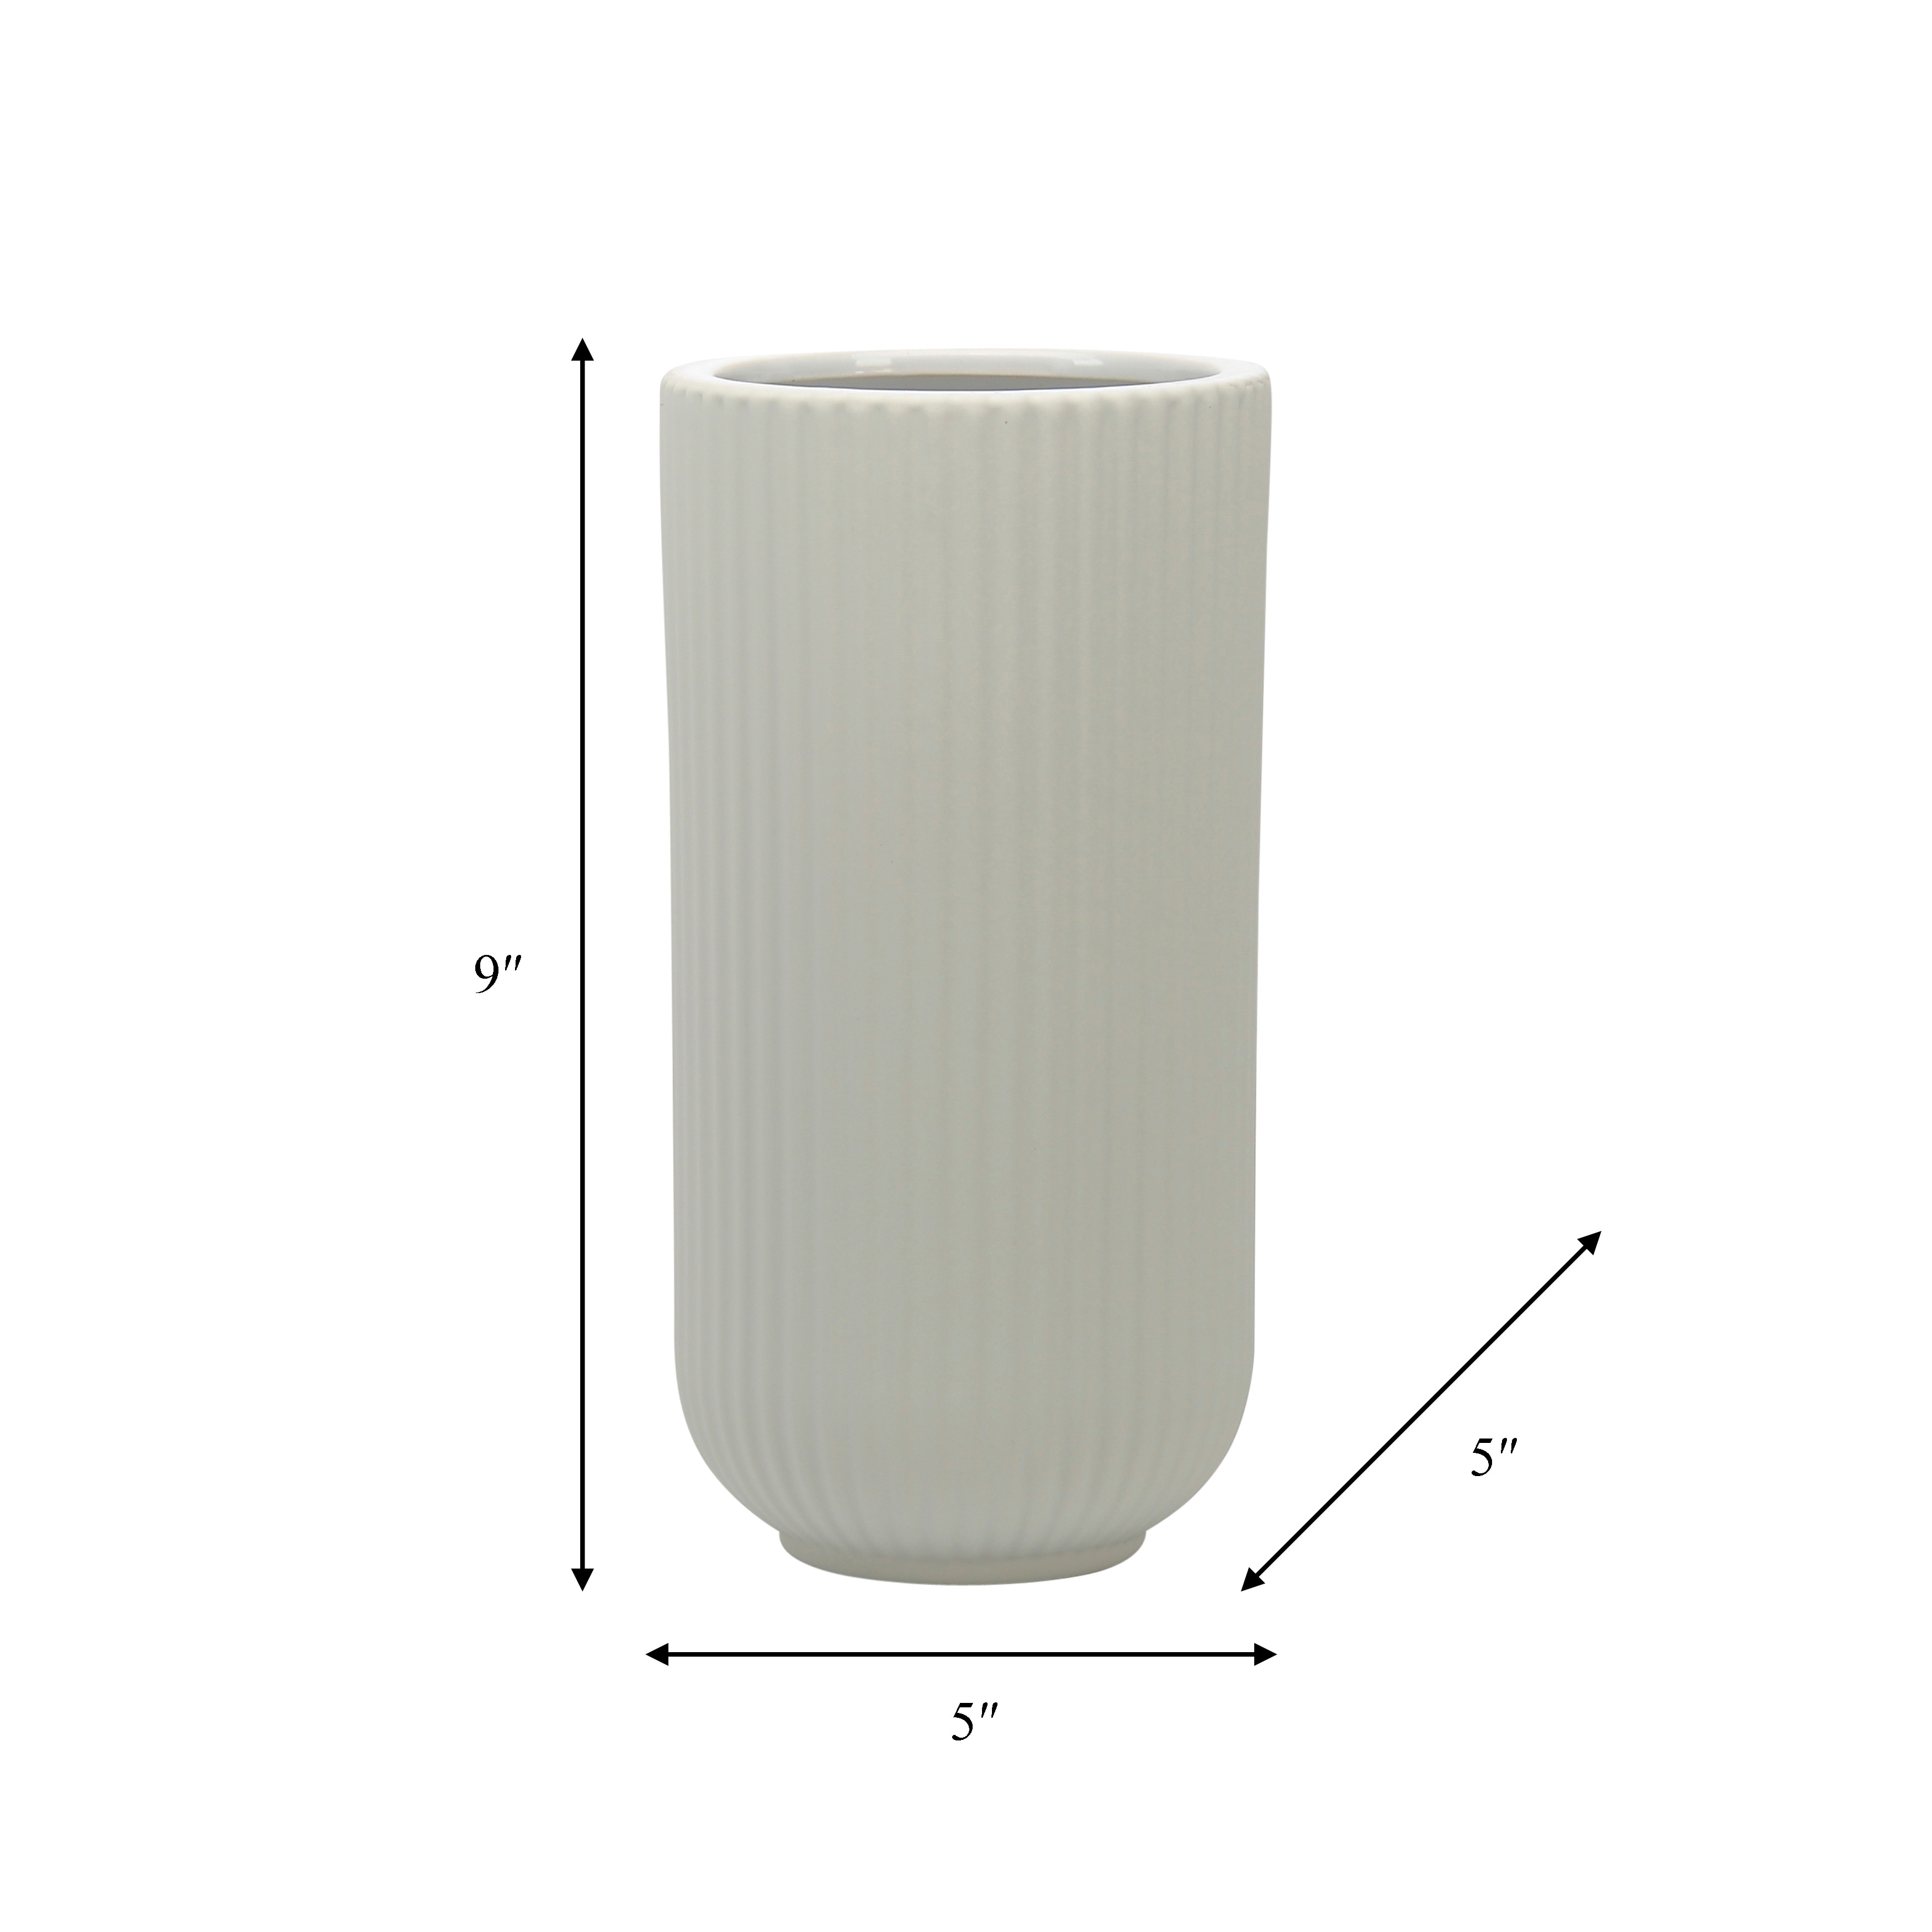 9" Ceramic Ridged Vase Classic White Decorative Vase for Home or Office Flower Display Great Gift Idea For Any